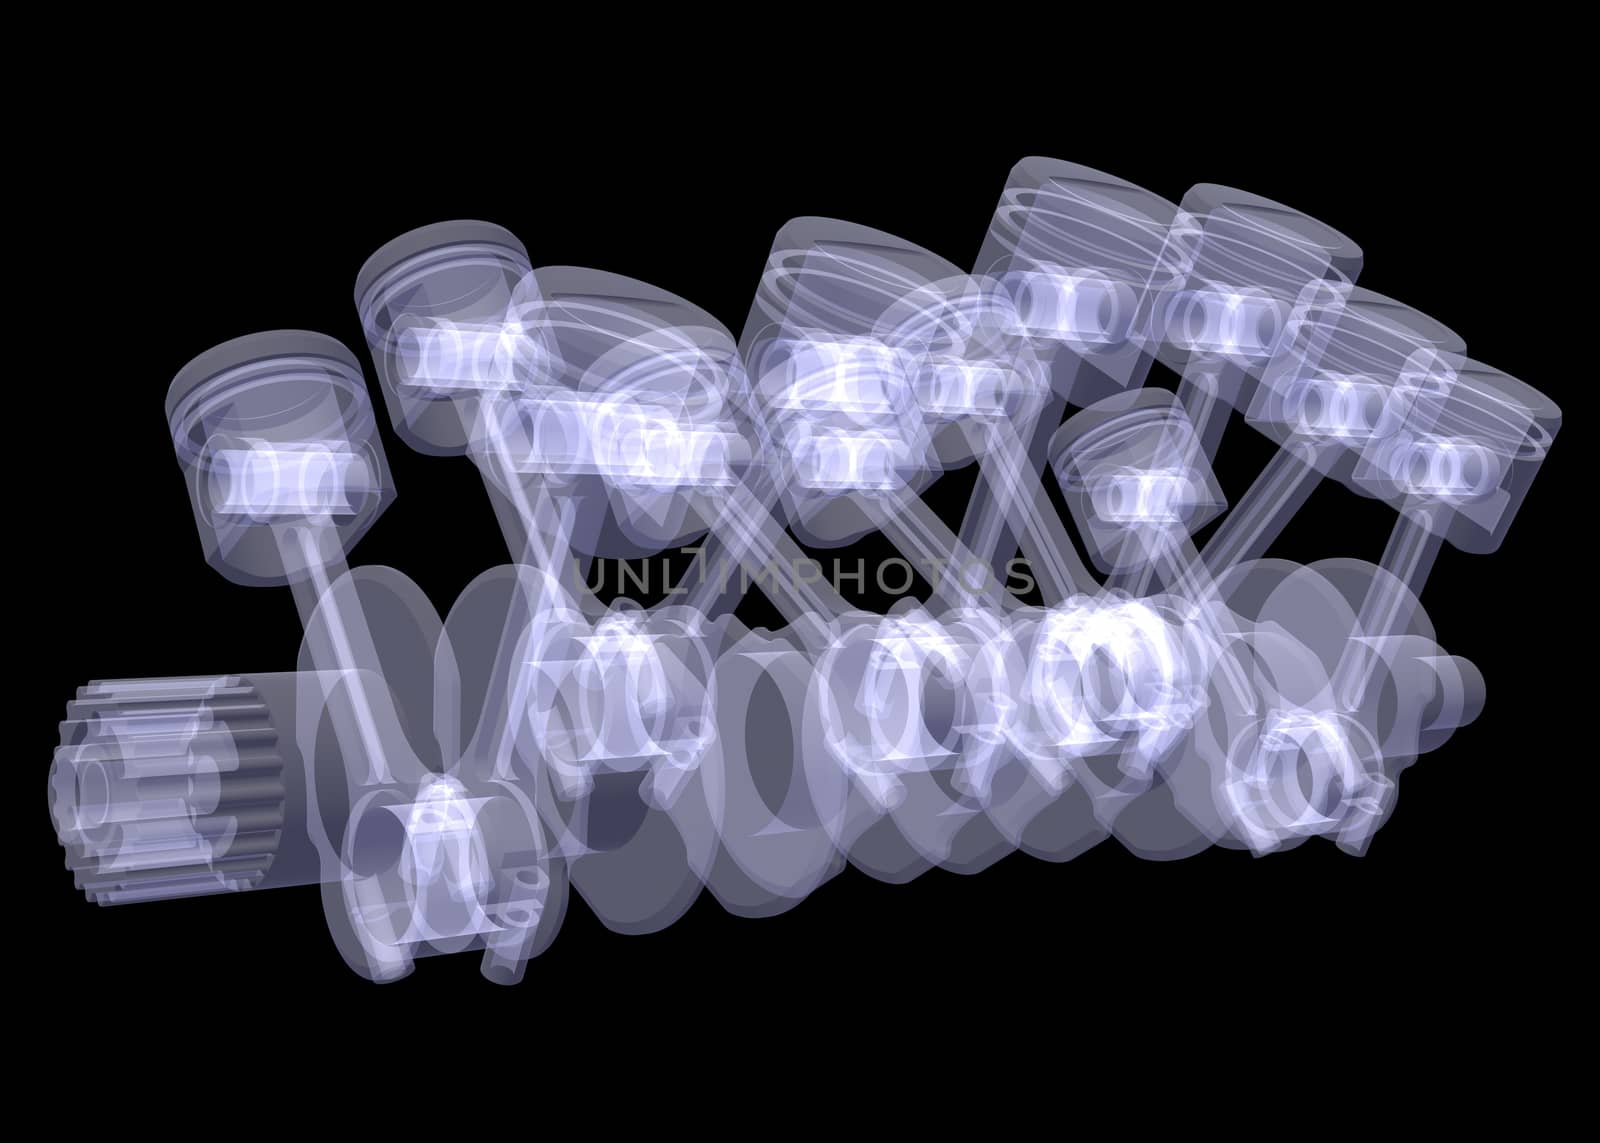 Crankshaft and pistons. X-ray render isolated on black background